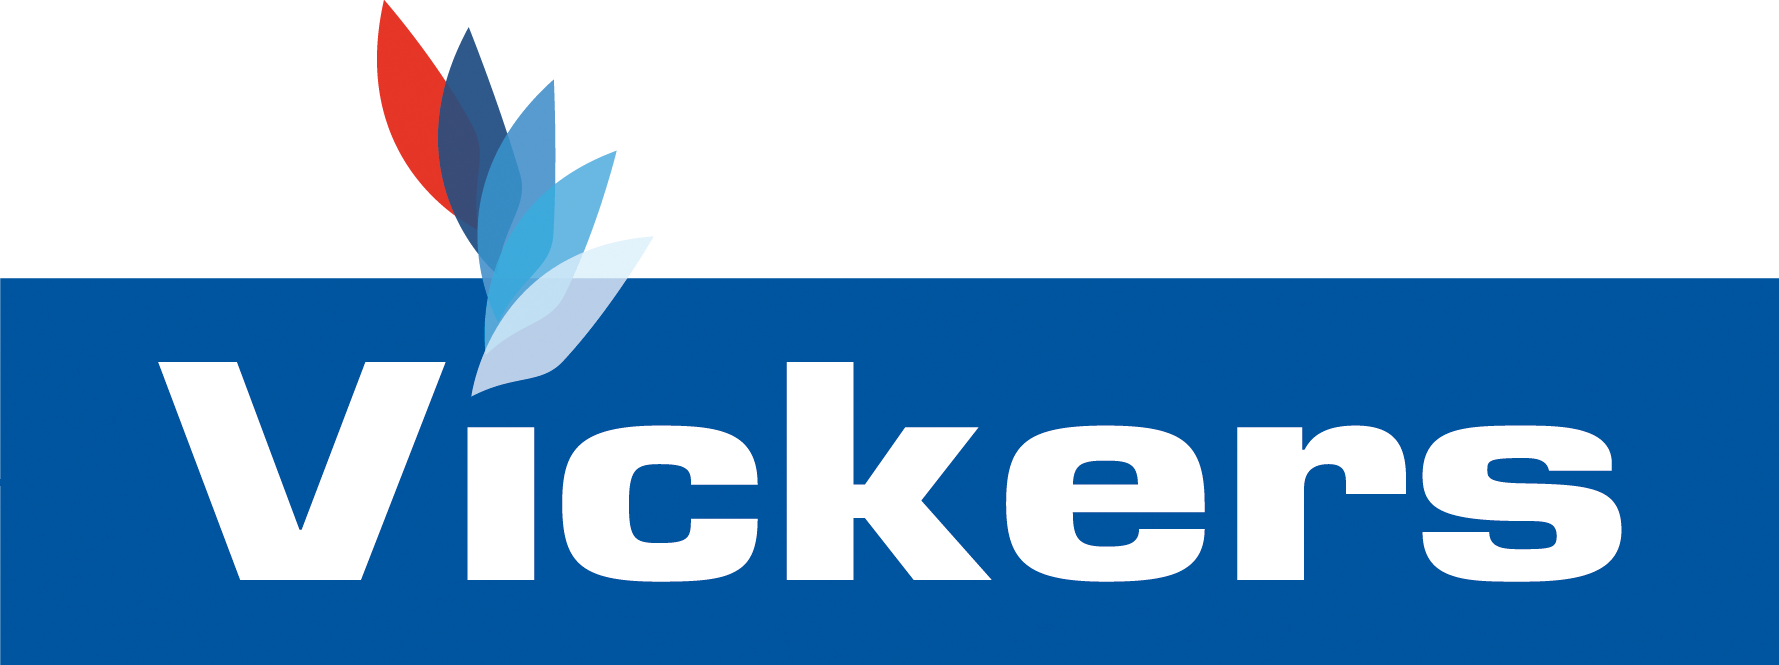 Vickers Logo - Vickers Energy Management System - Sprinx